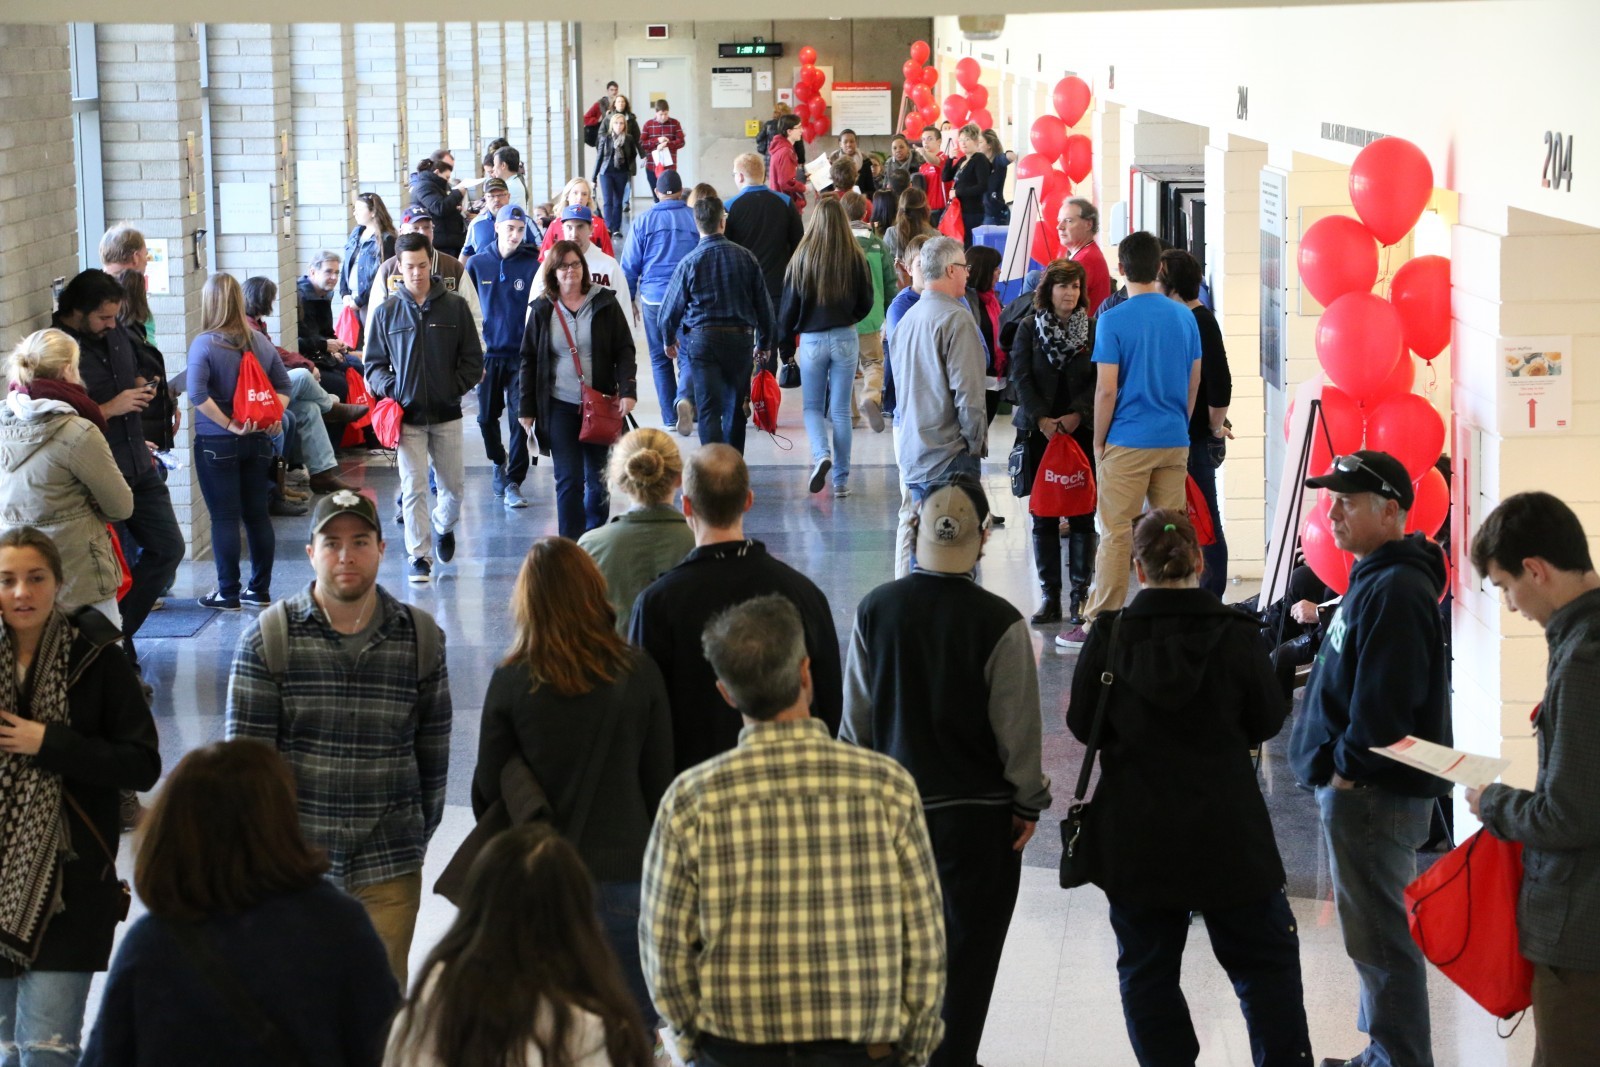 Prospective students and parents check out Brock University.